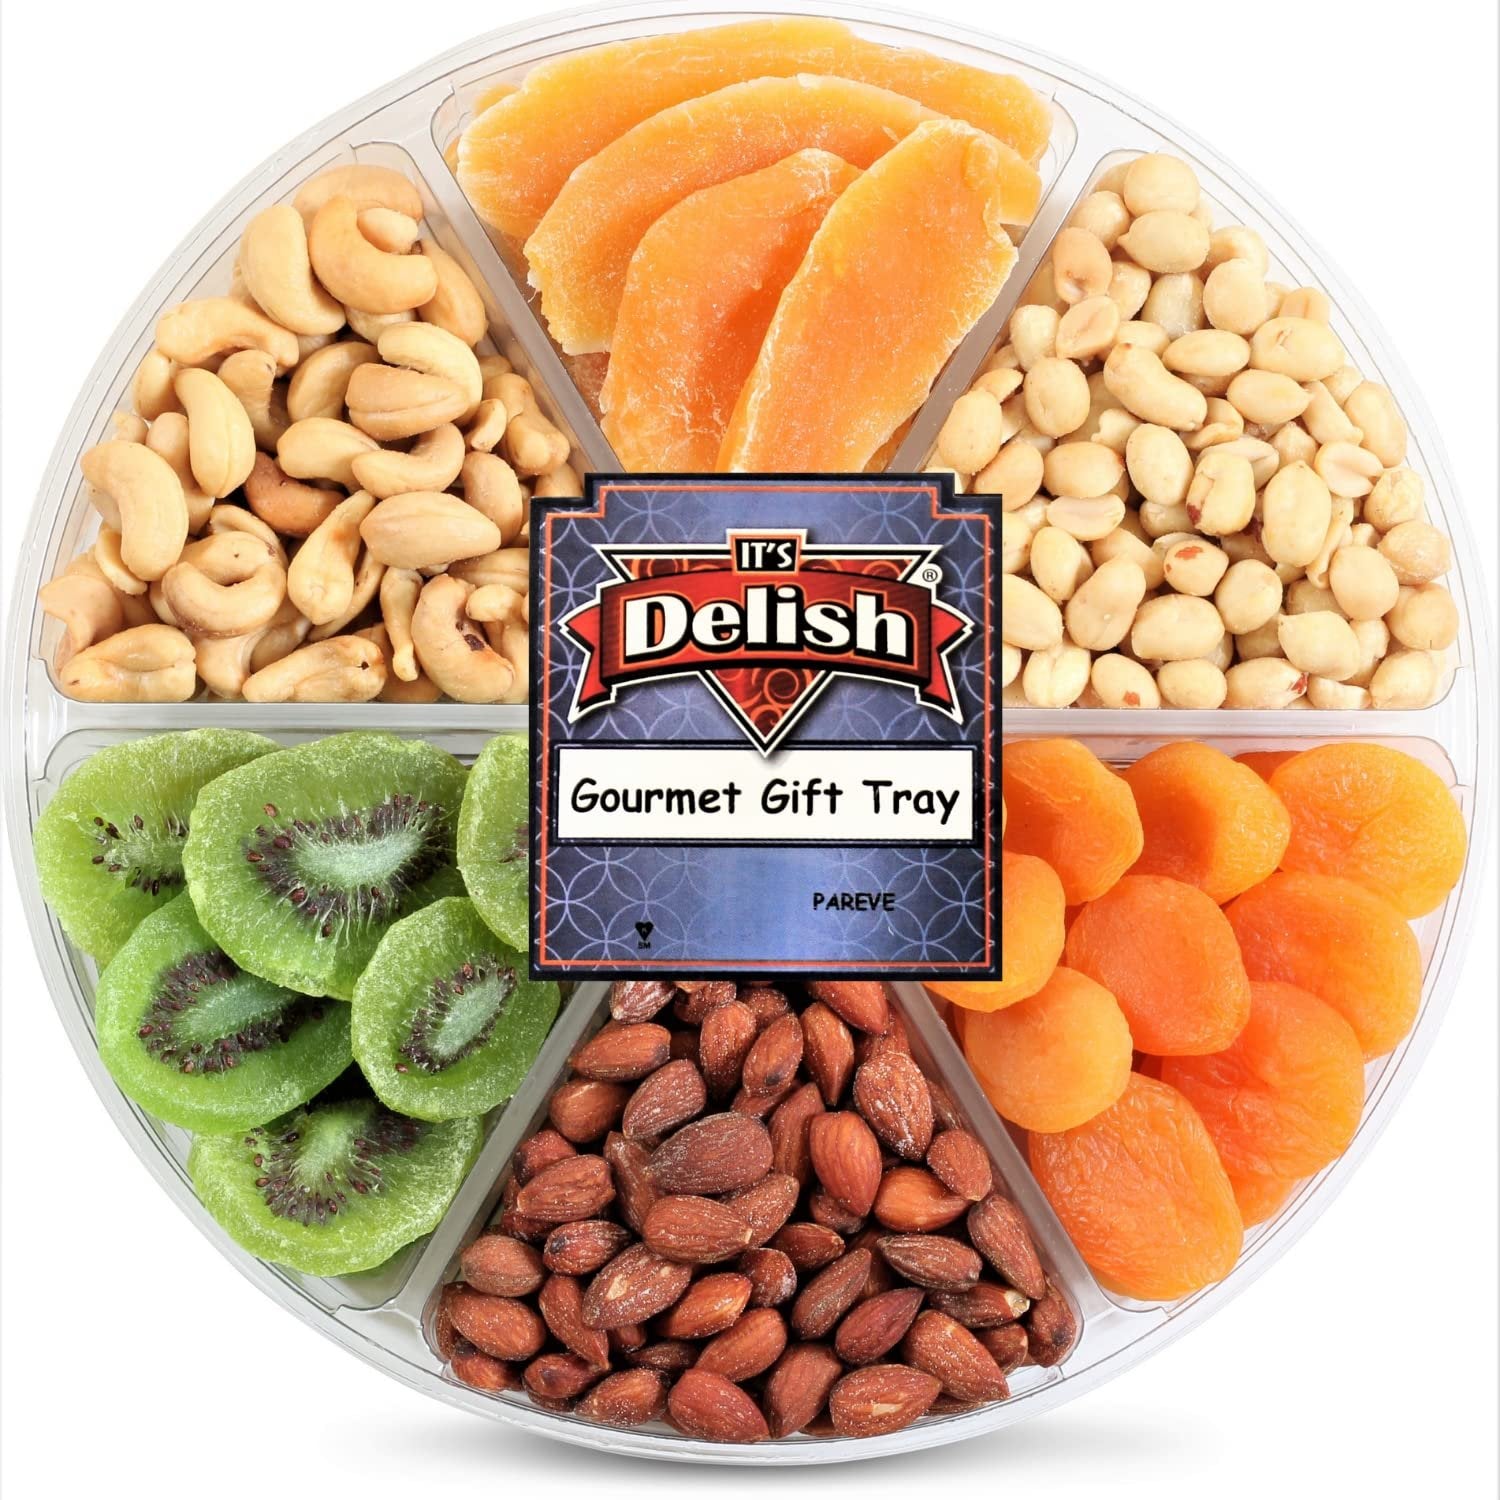 Holiday Spirit Dried Fruit and Nuts: Gift/Send Christmas Gifts Online  JVS1196228 |IGP.com